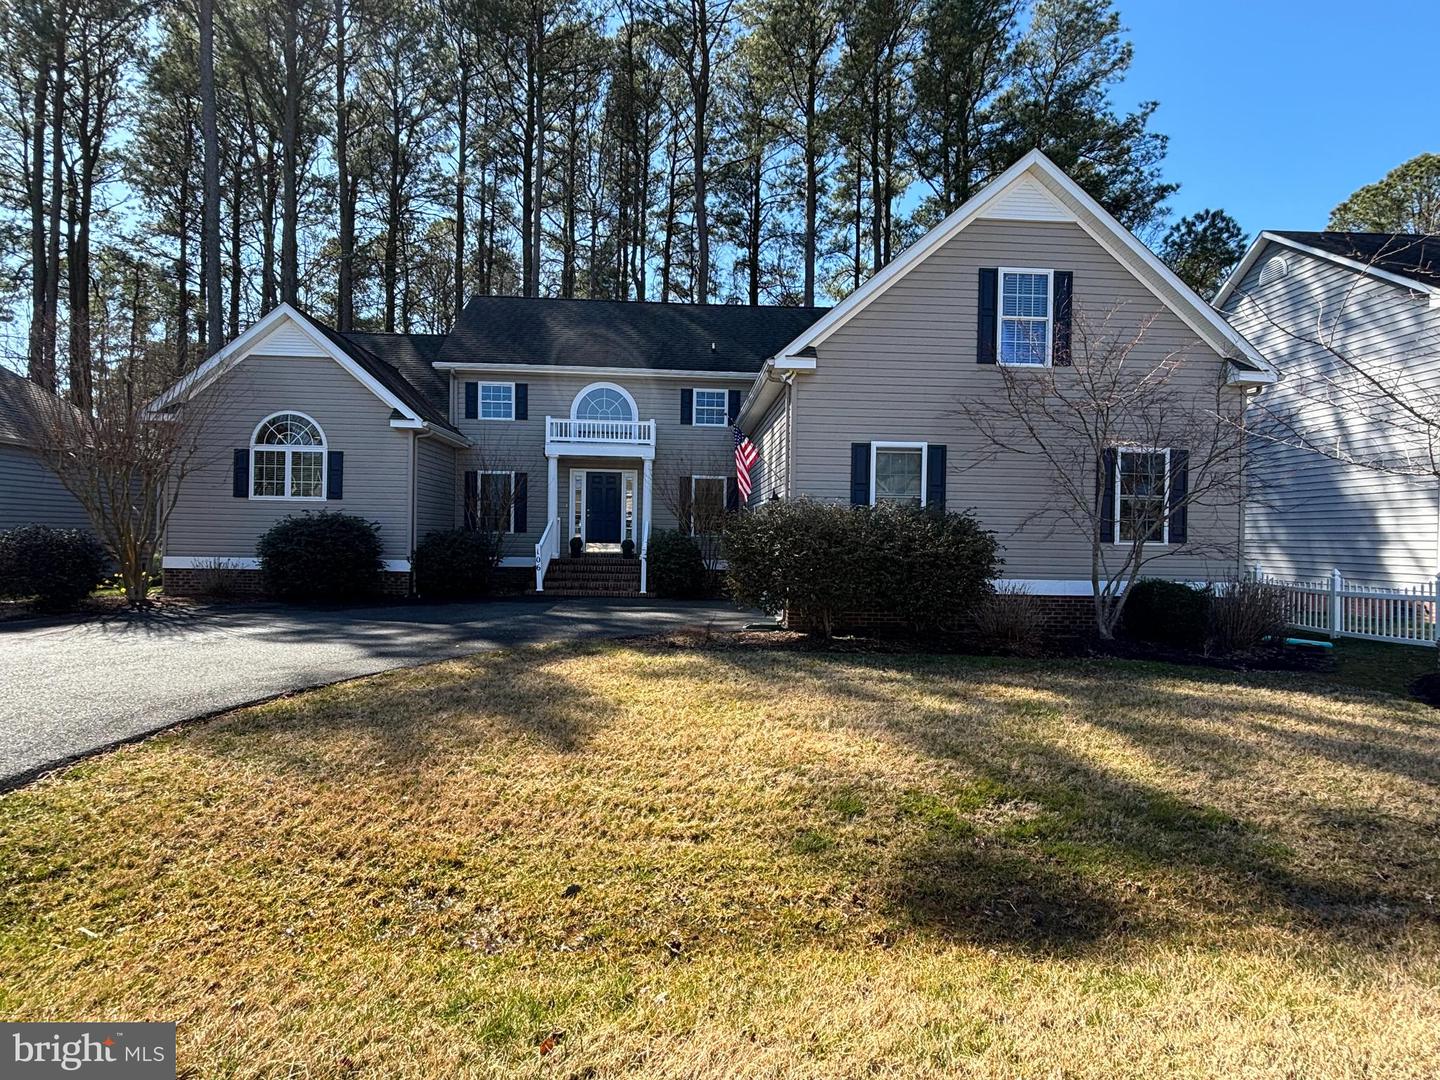 MDWO2019426-802903753126-2024-03-08-00-14-51 106 Pine Forest Dr | Berlin, MD Real Estate For Sale | MLS# Mdwo2019426  - 1st Choice Properties